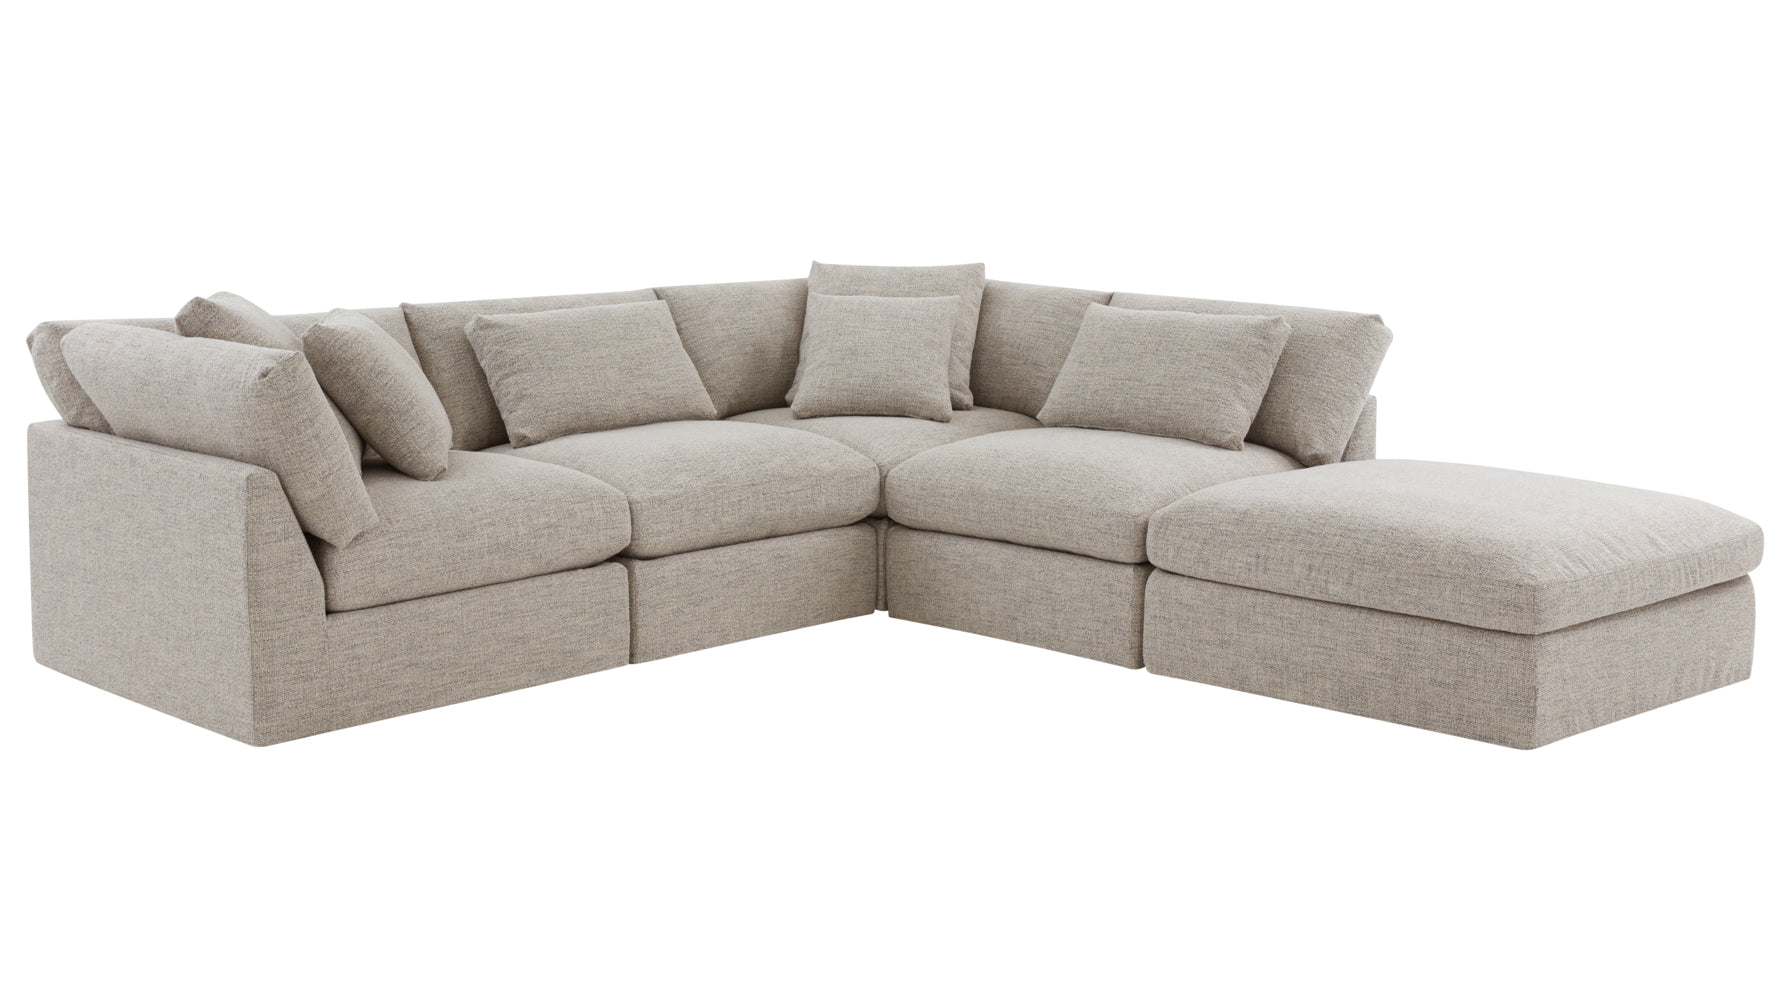 Get Together™ 5-Piece Modular Sectional, Large, Oatmeal - Image 2